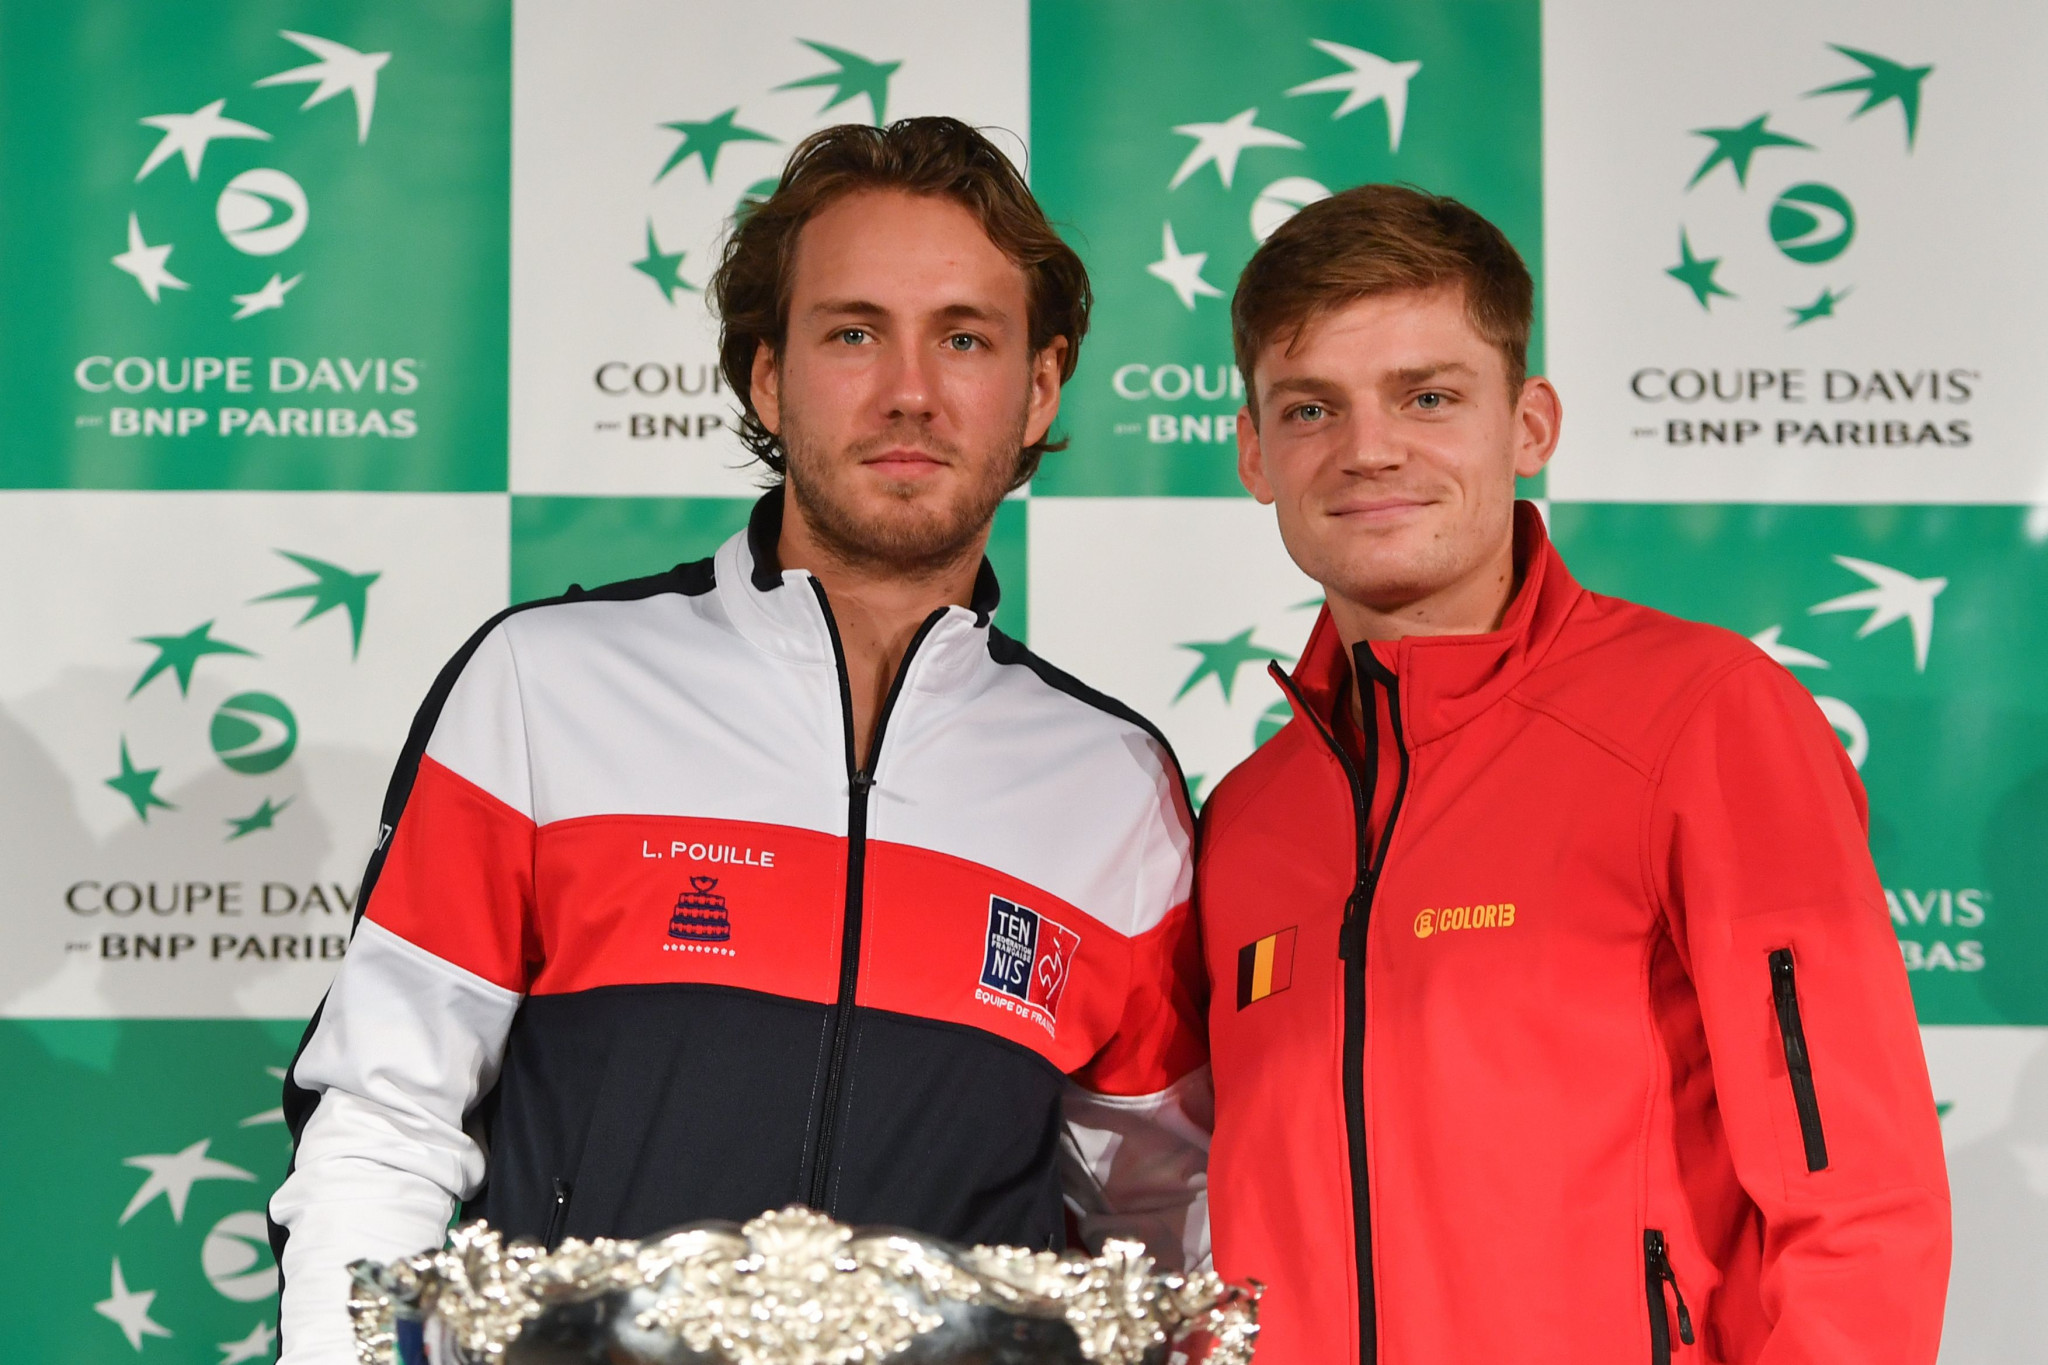 David Goffin and Lucas Pouille will put their friendship to one side when they kick off the 2017 Davis Cup by BNP Paribas Final on Friday ©Getty Images